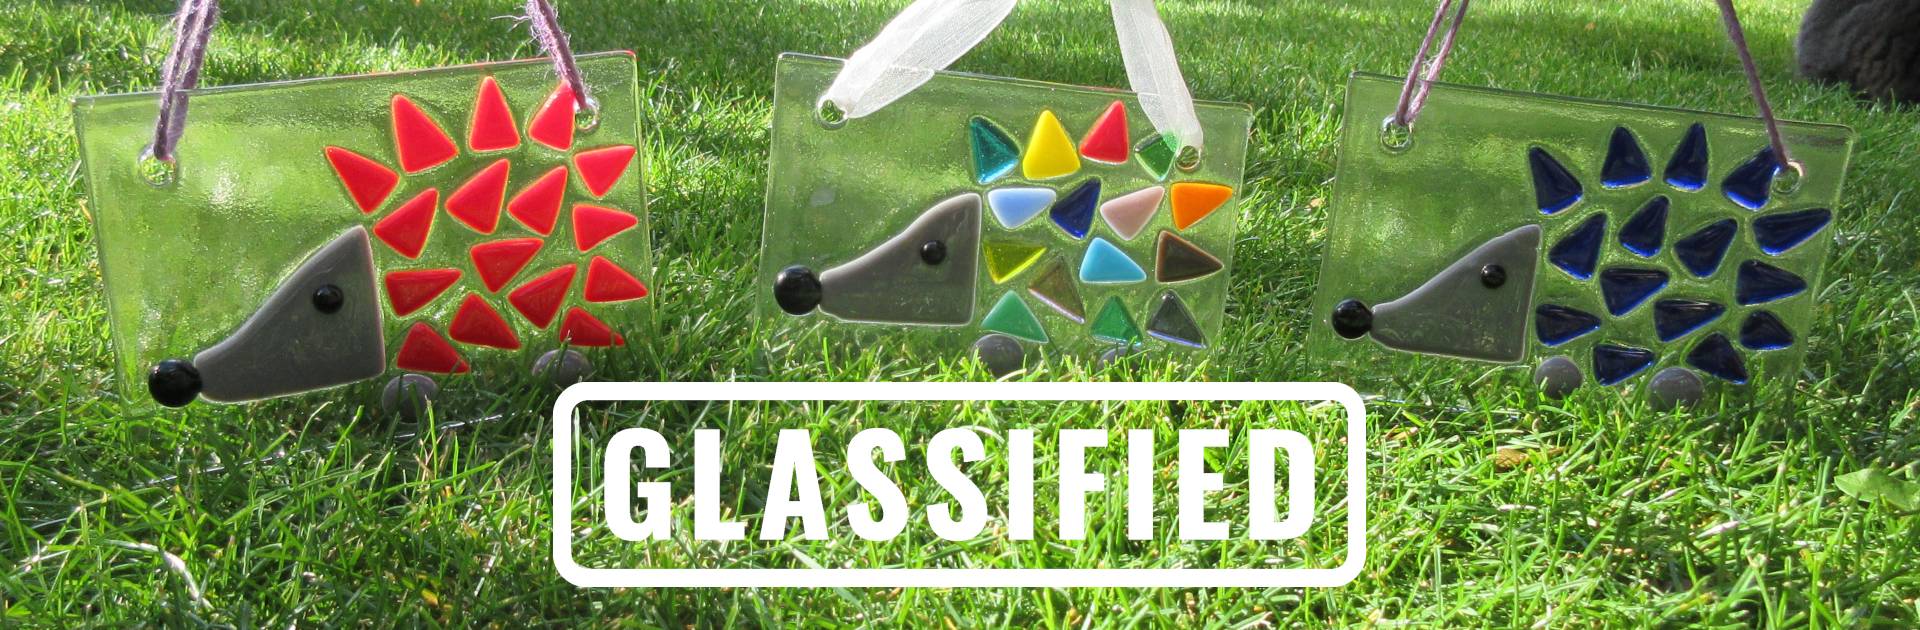 Website banner: Glassified logo with three fused glass hedgehogs